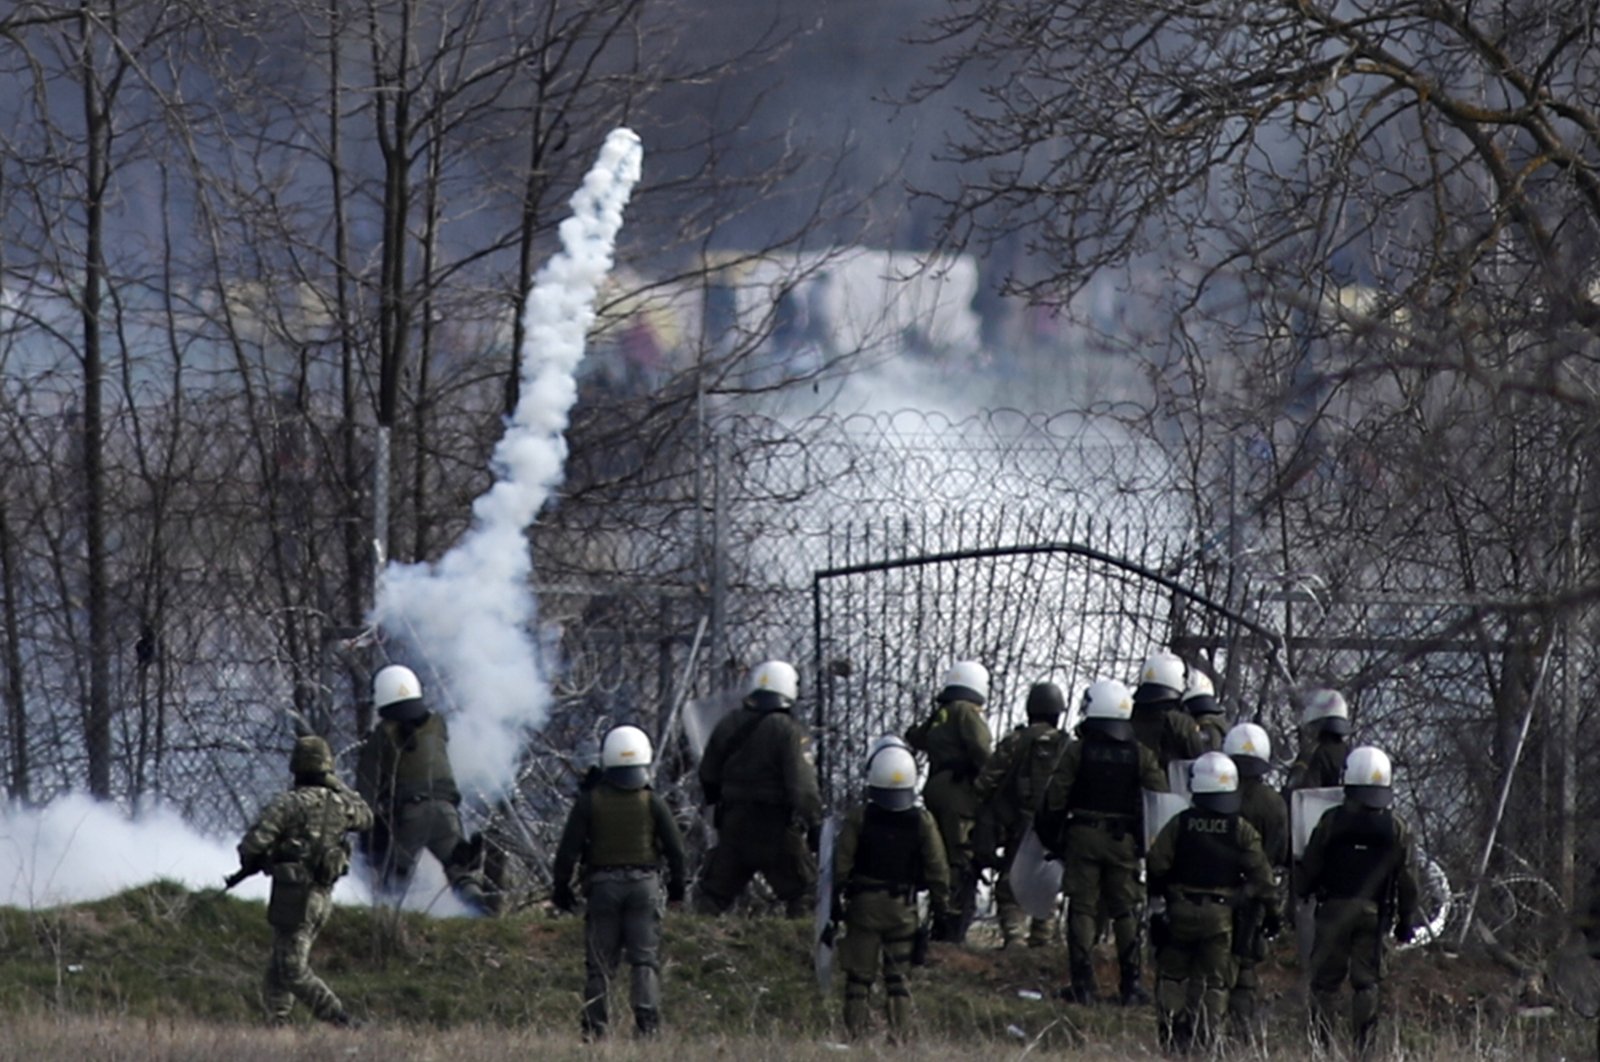 Greek police guard as migrants gather at a border fence on the Turkish side, during clashes at the Greek-Turkish border in Kastanies, Evros region on March 7. Thousands of refugees and other migrants have been trying to get into EU member Greece in the past week after Turkey declared that its previously guarded borders with Europe were open. (AP Photo)